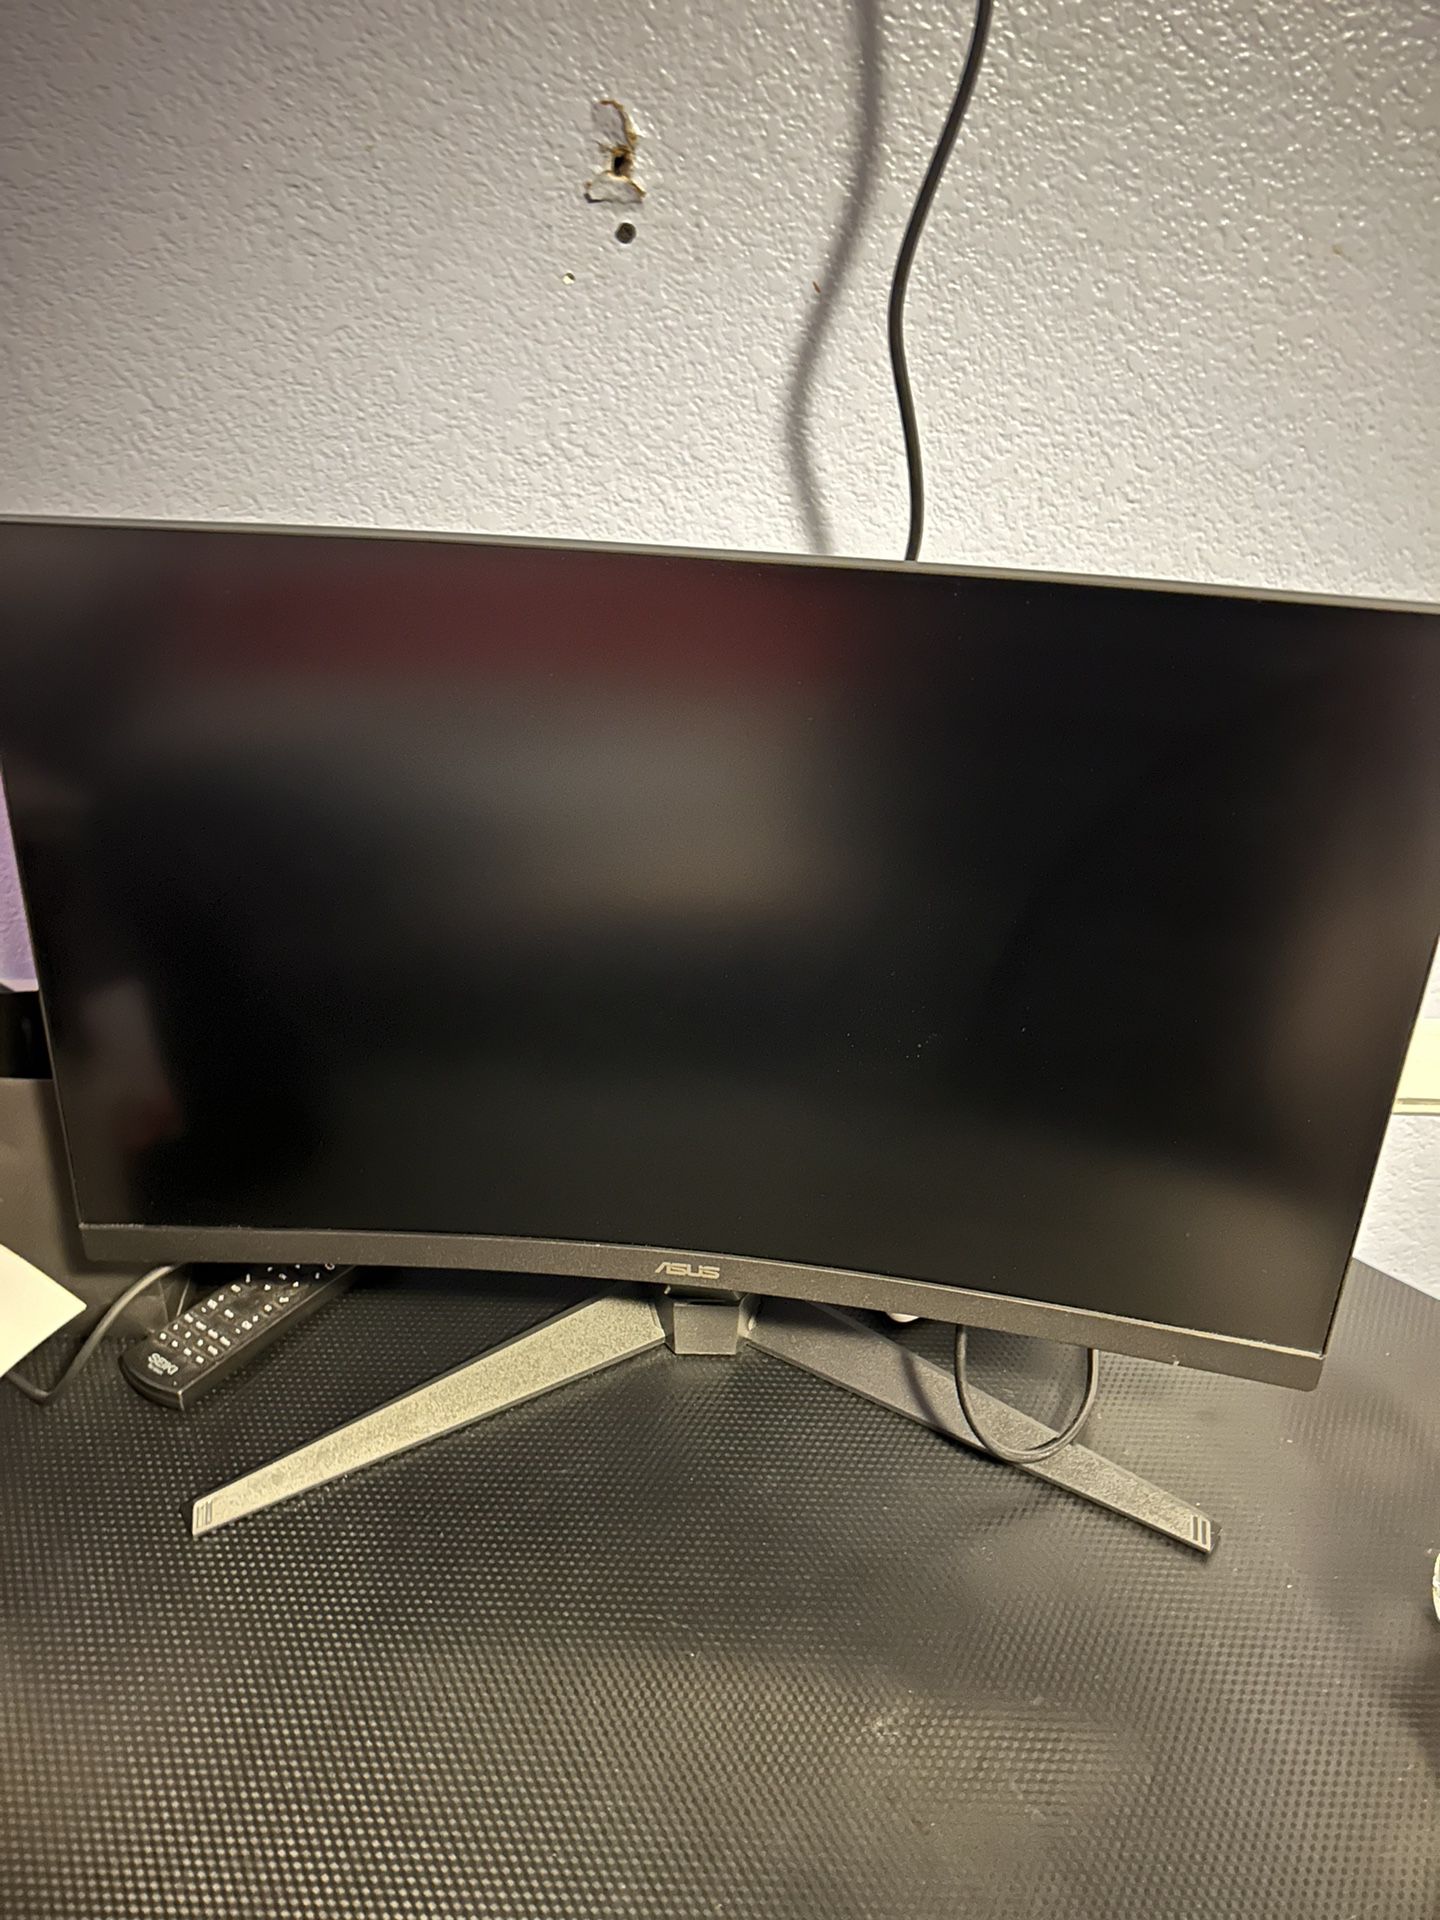 New ! ASUS Curved Monitor 160 Hz Comes built!!